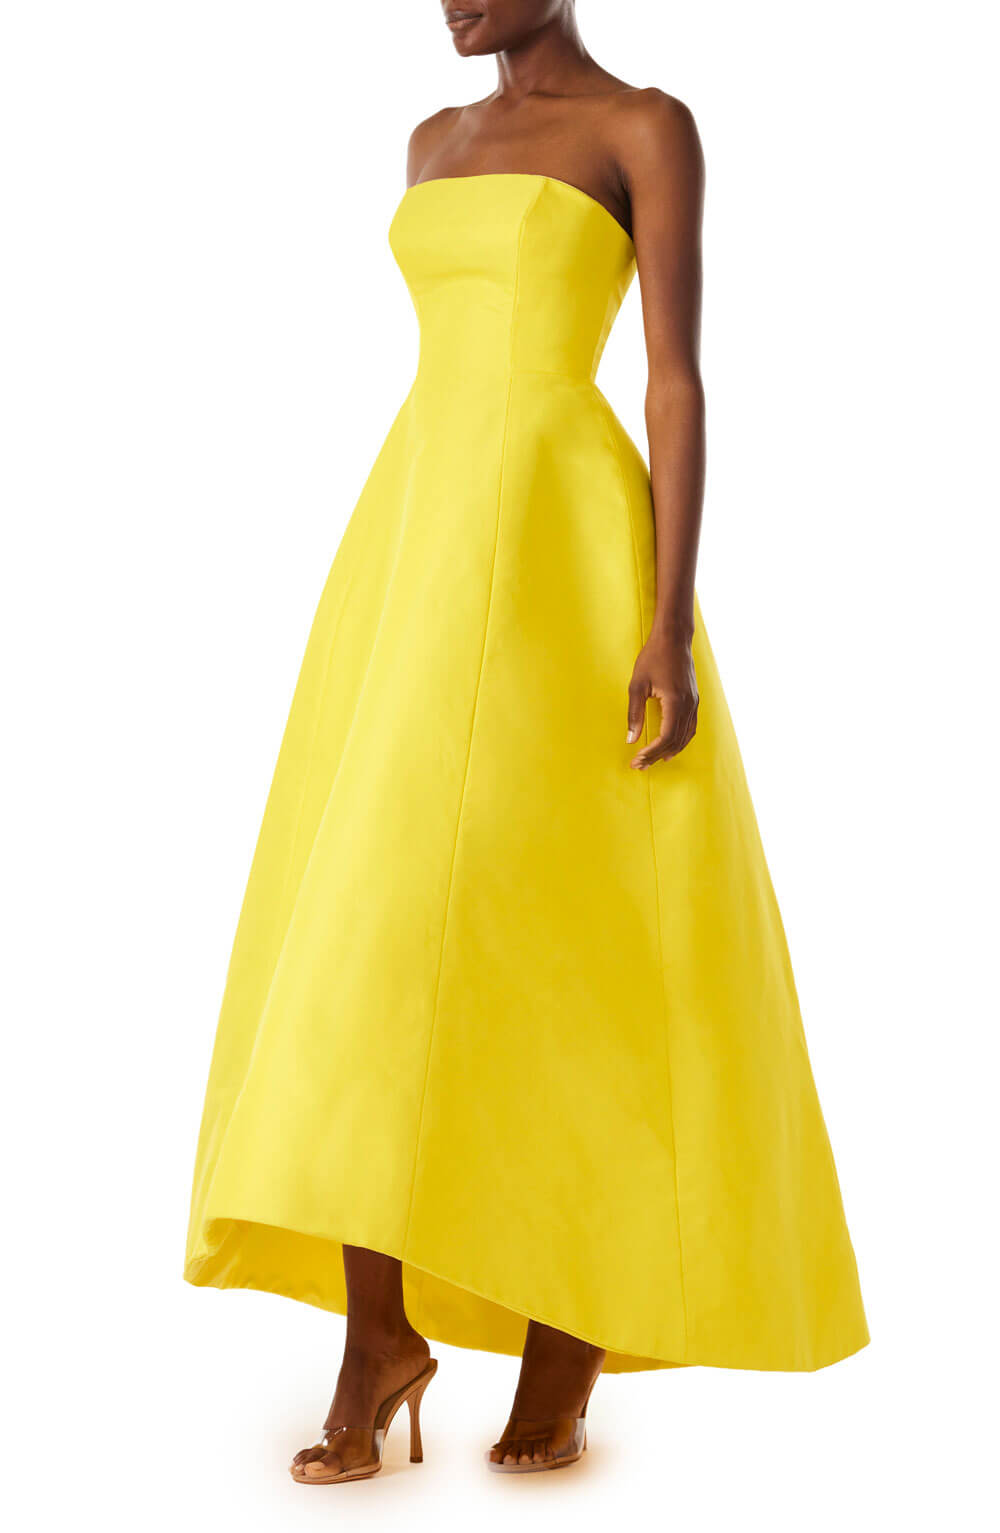 Monique Lhuillier canary yellow strapless gown with high-low hem in cotton/silk faille fabric.